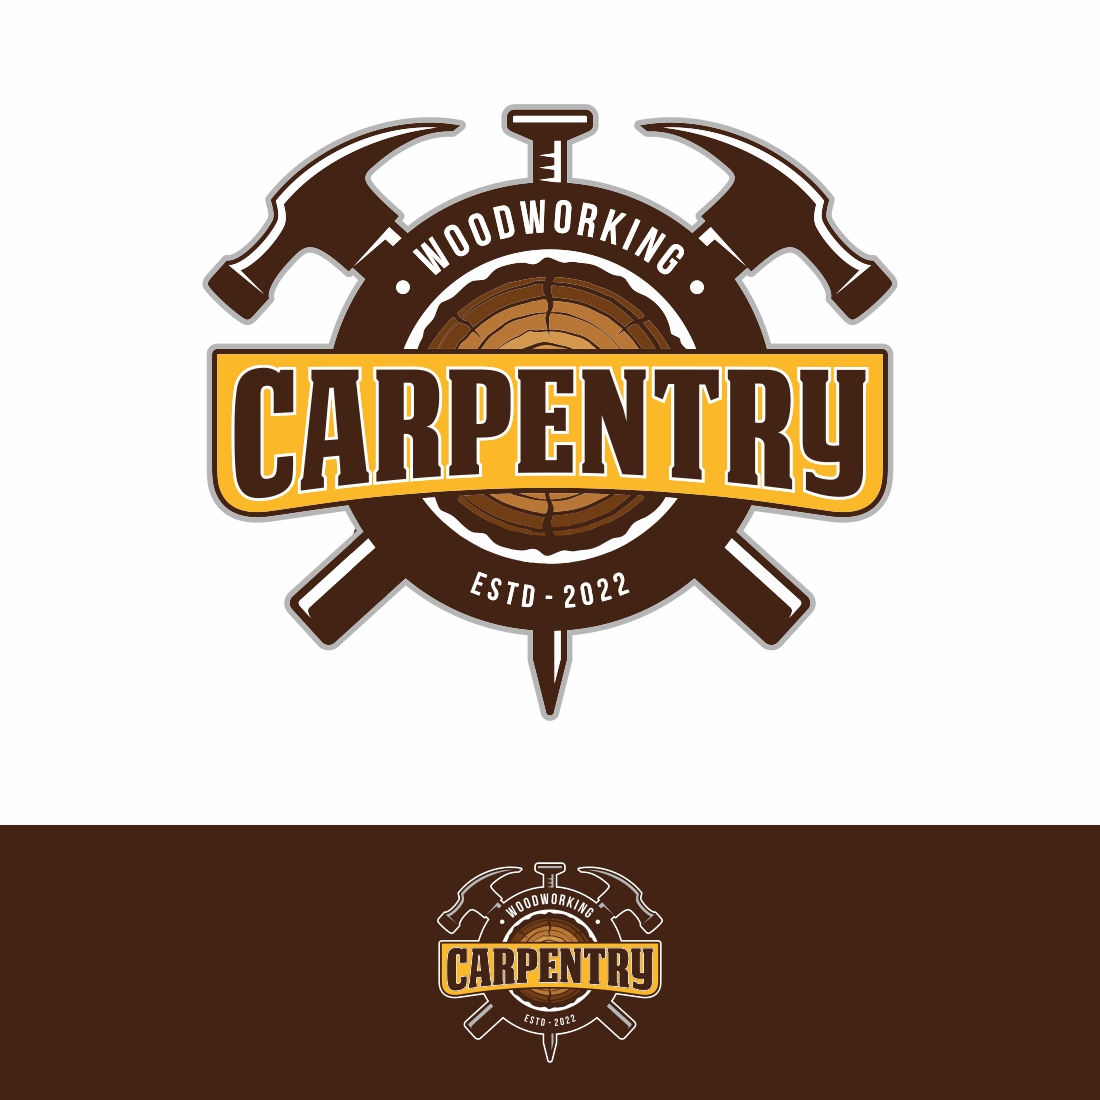 Carpentry vintage logo design template – Only $6 preview image.